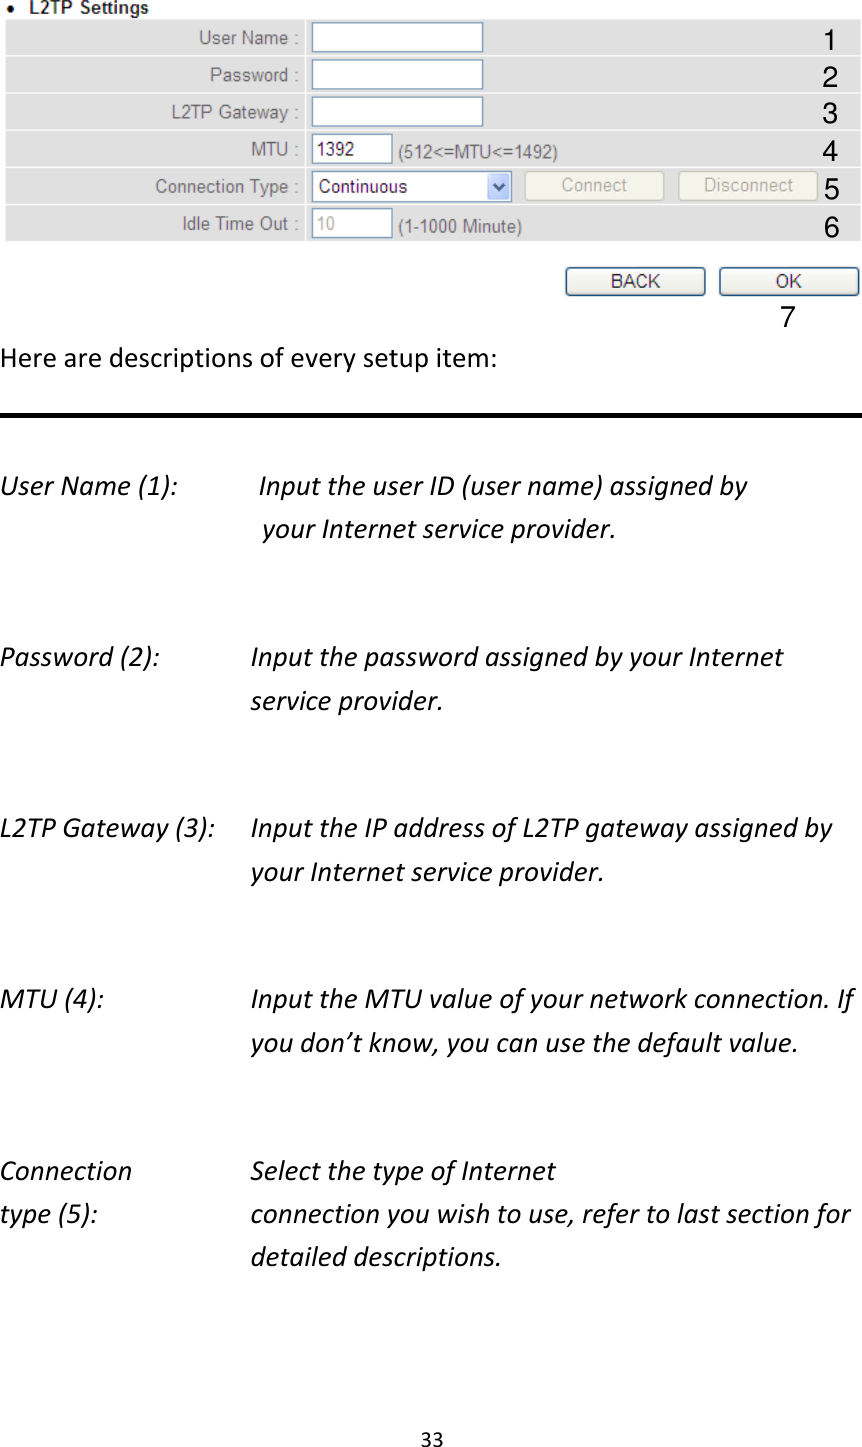 33  Here are descriptions of every setup item:  User Name (1):       Input the user ID (user name) assigned by                                             your Internet service provider.  Password (2):    Input the password assigned by your Internet service provider.  L2TP Gateway (3):    Input the IP address of L2TP gateway assigned by your Internet service provider.  MTU (4):    Input the MTU value of your network connection. If you don’t know, you can use the default value.  Connection       Select the type of Internet type (5):    connection you wish to use, refer to last section for detailed descriptions.   1 2 4 3 5 7 6 